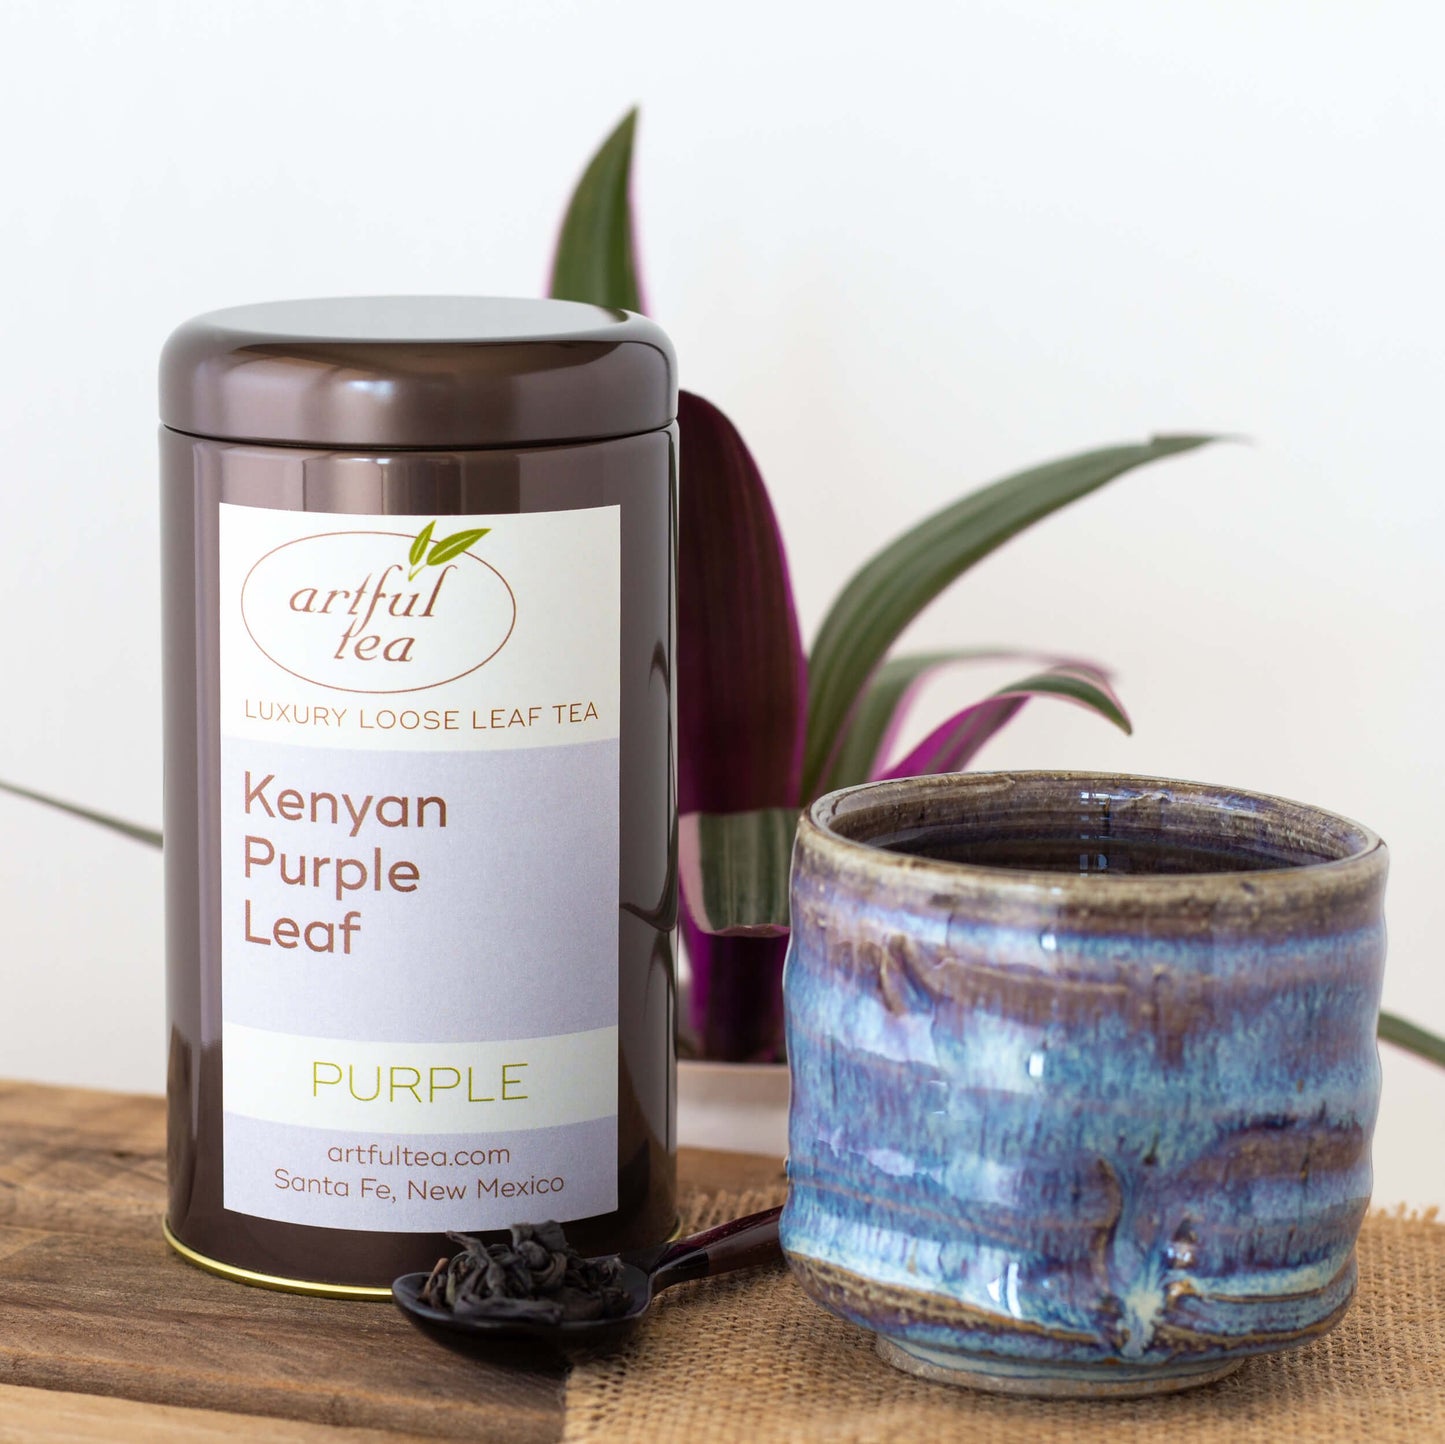 Kenyan Purple Leaf Tea shown packaged in a brown tin next to a blue pottery teacup and a spoon of tea leaves